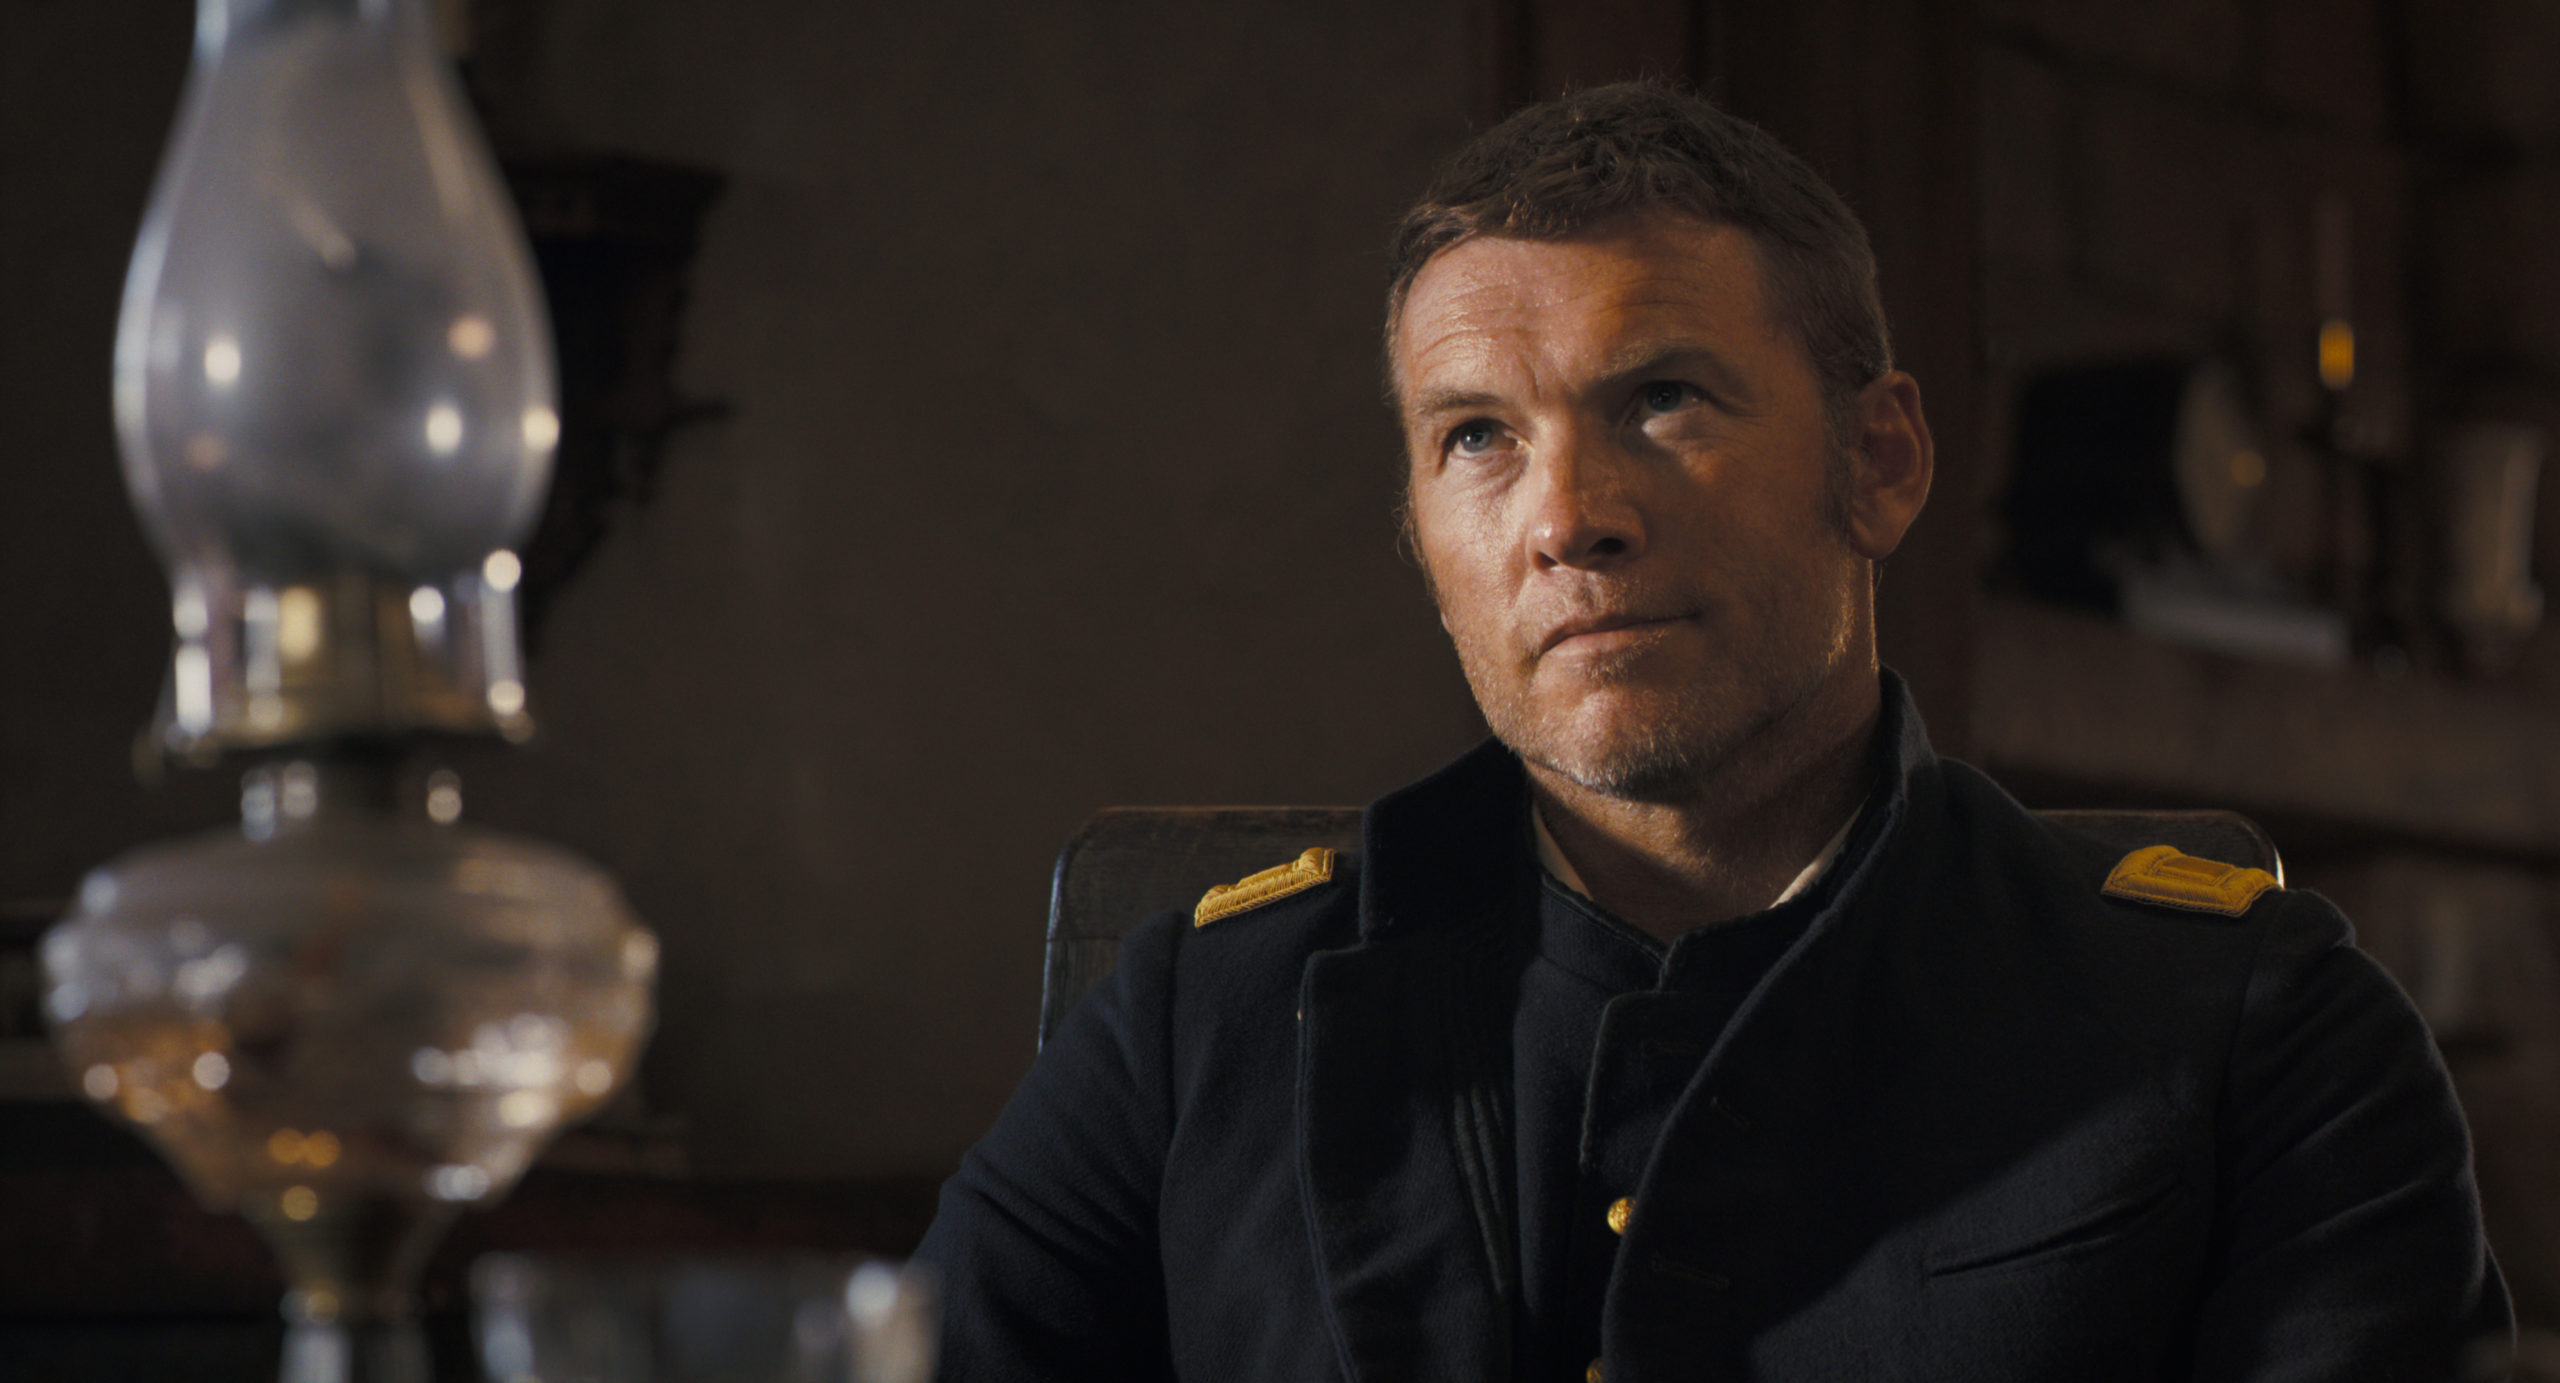 A still shot of Sam Worthington's character in the new Kevin Costner-directed "Horizon: An American Saga." Photo courtesy of New Line Cinema.